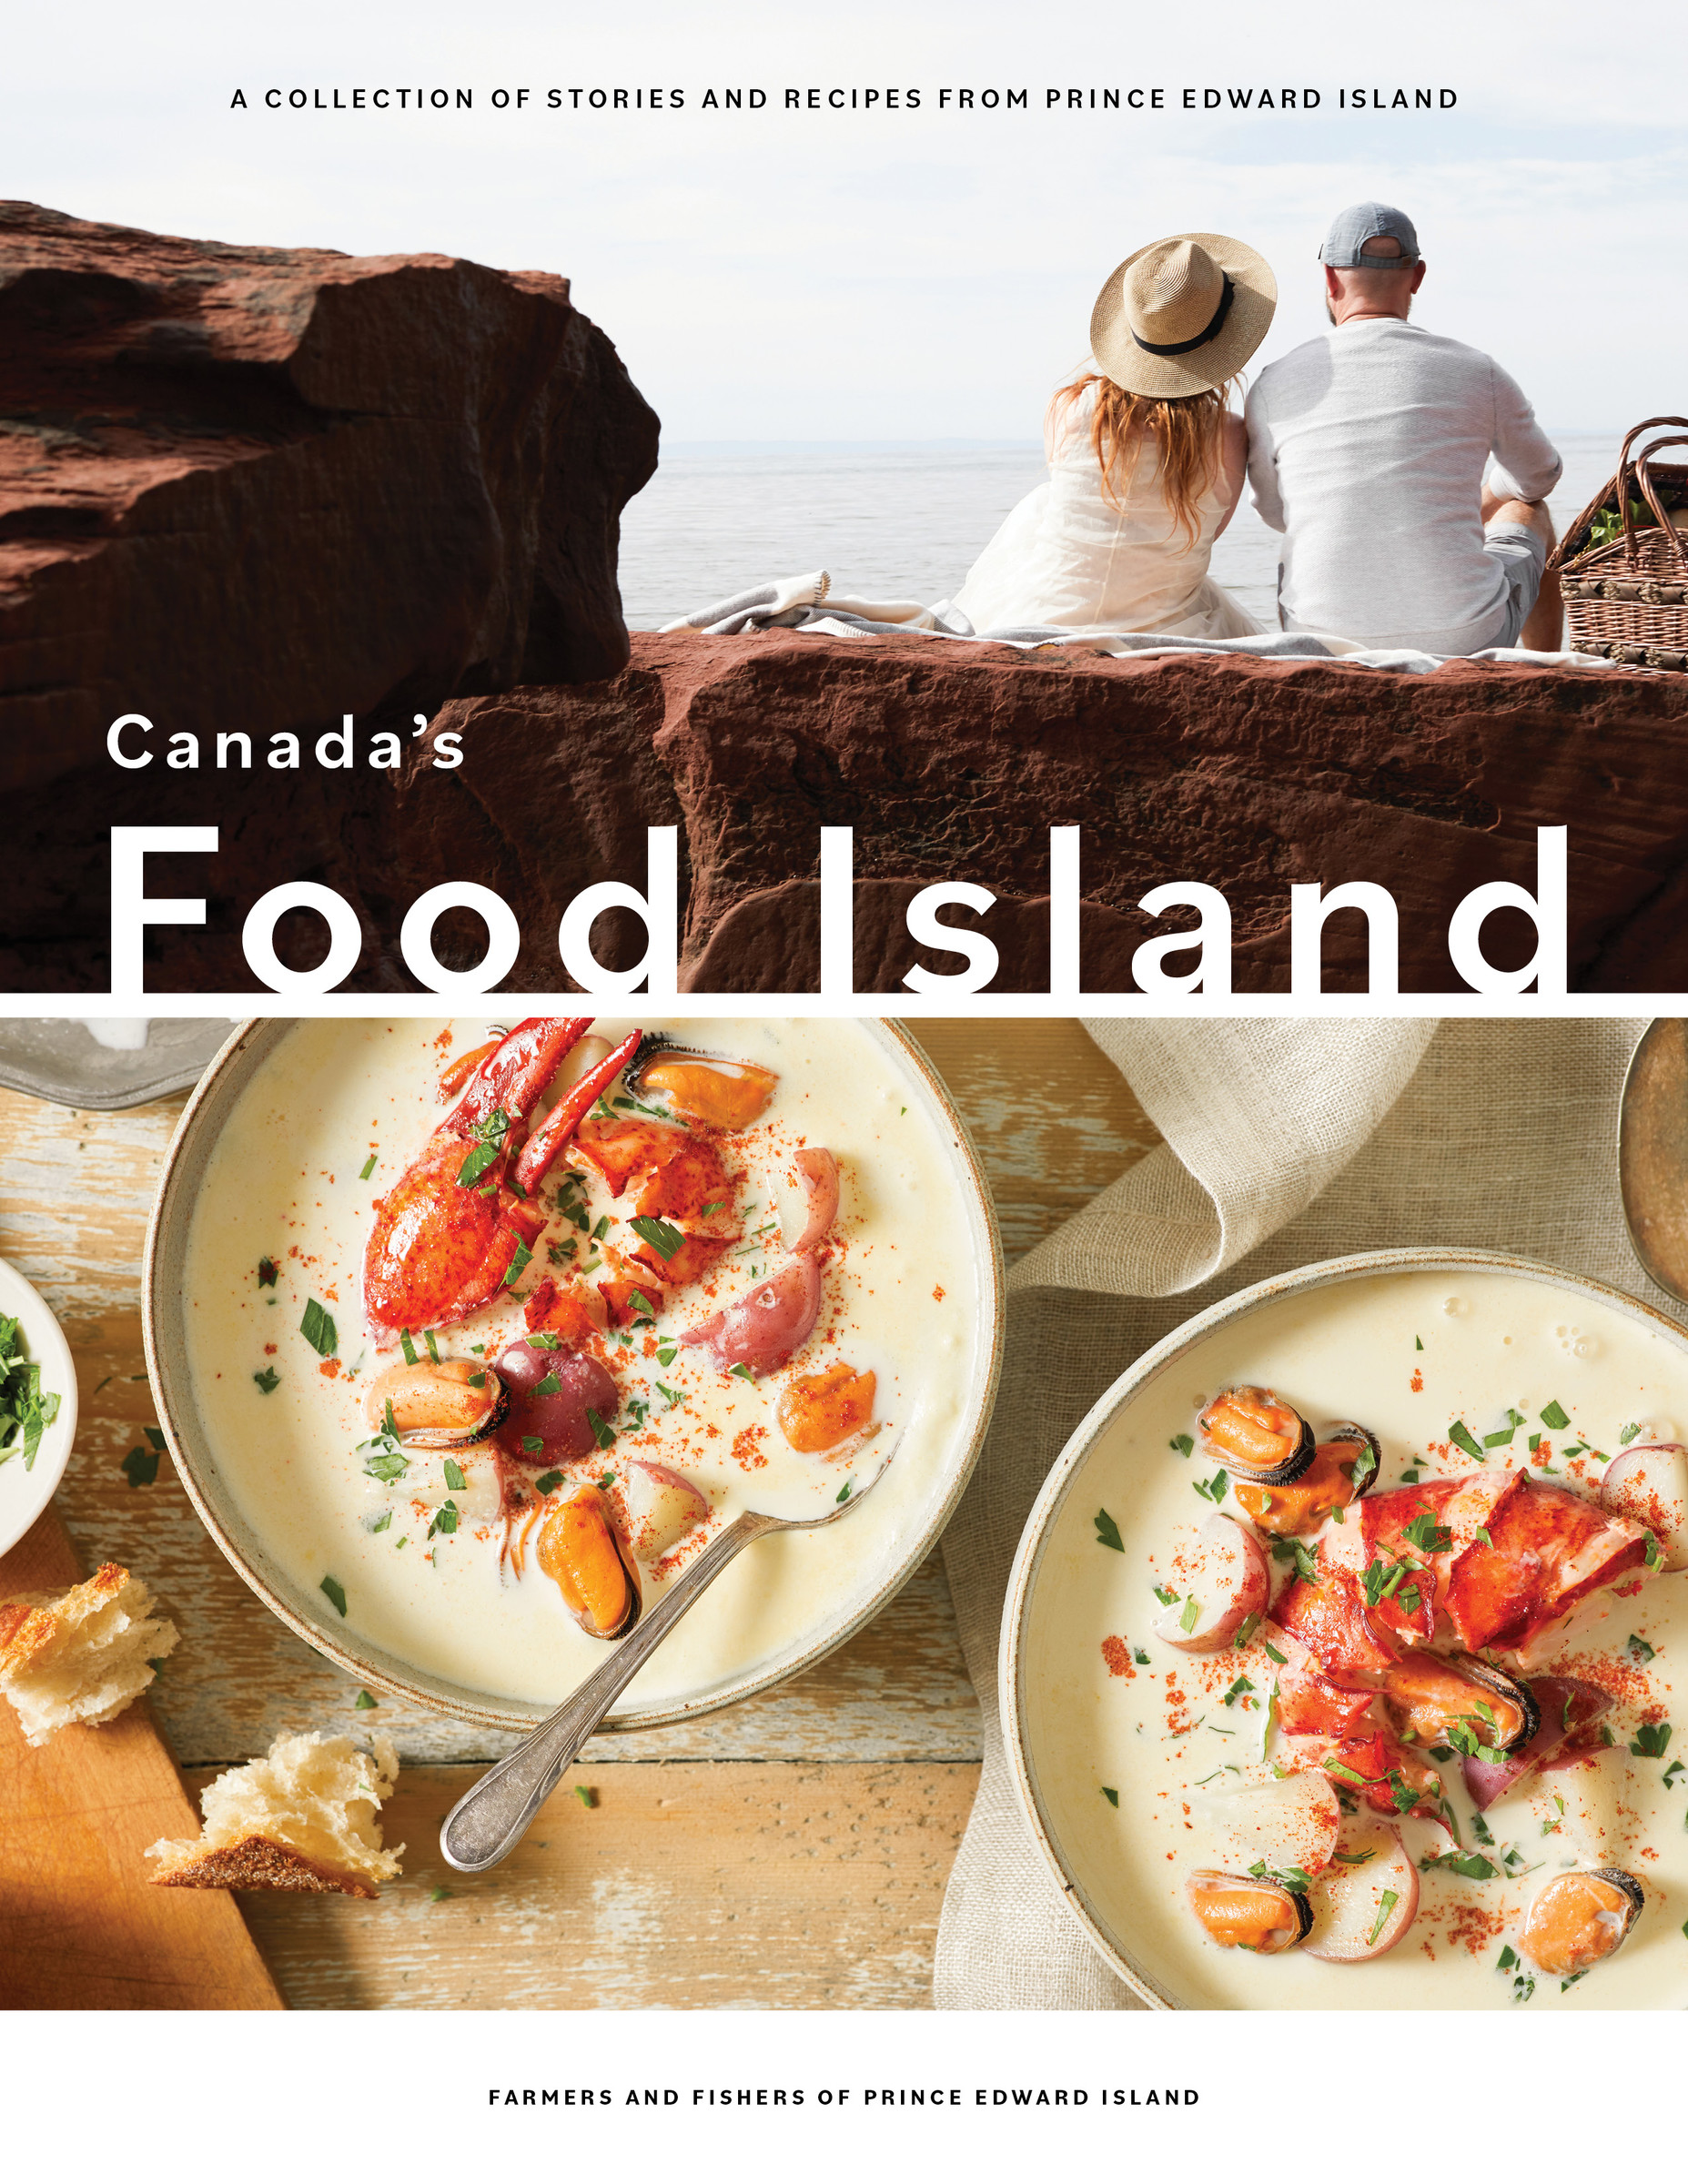 Canada's Food Island : A Collection of Stories and Recipes from Prince Edward Island | Farmers and Fishers of Prince Edward Island